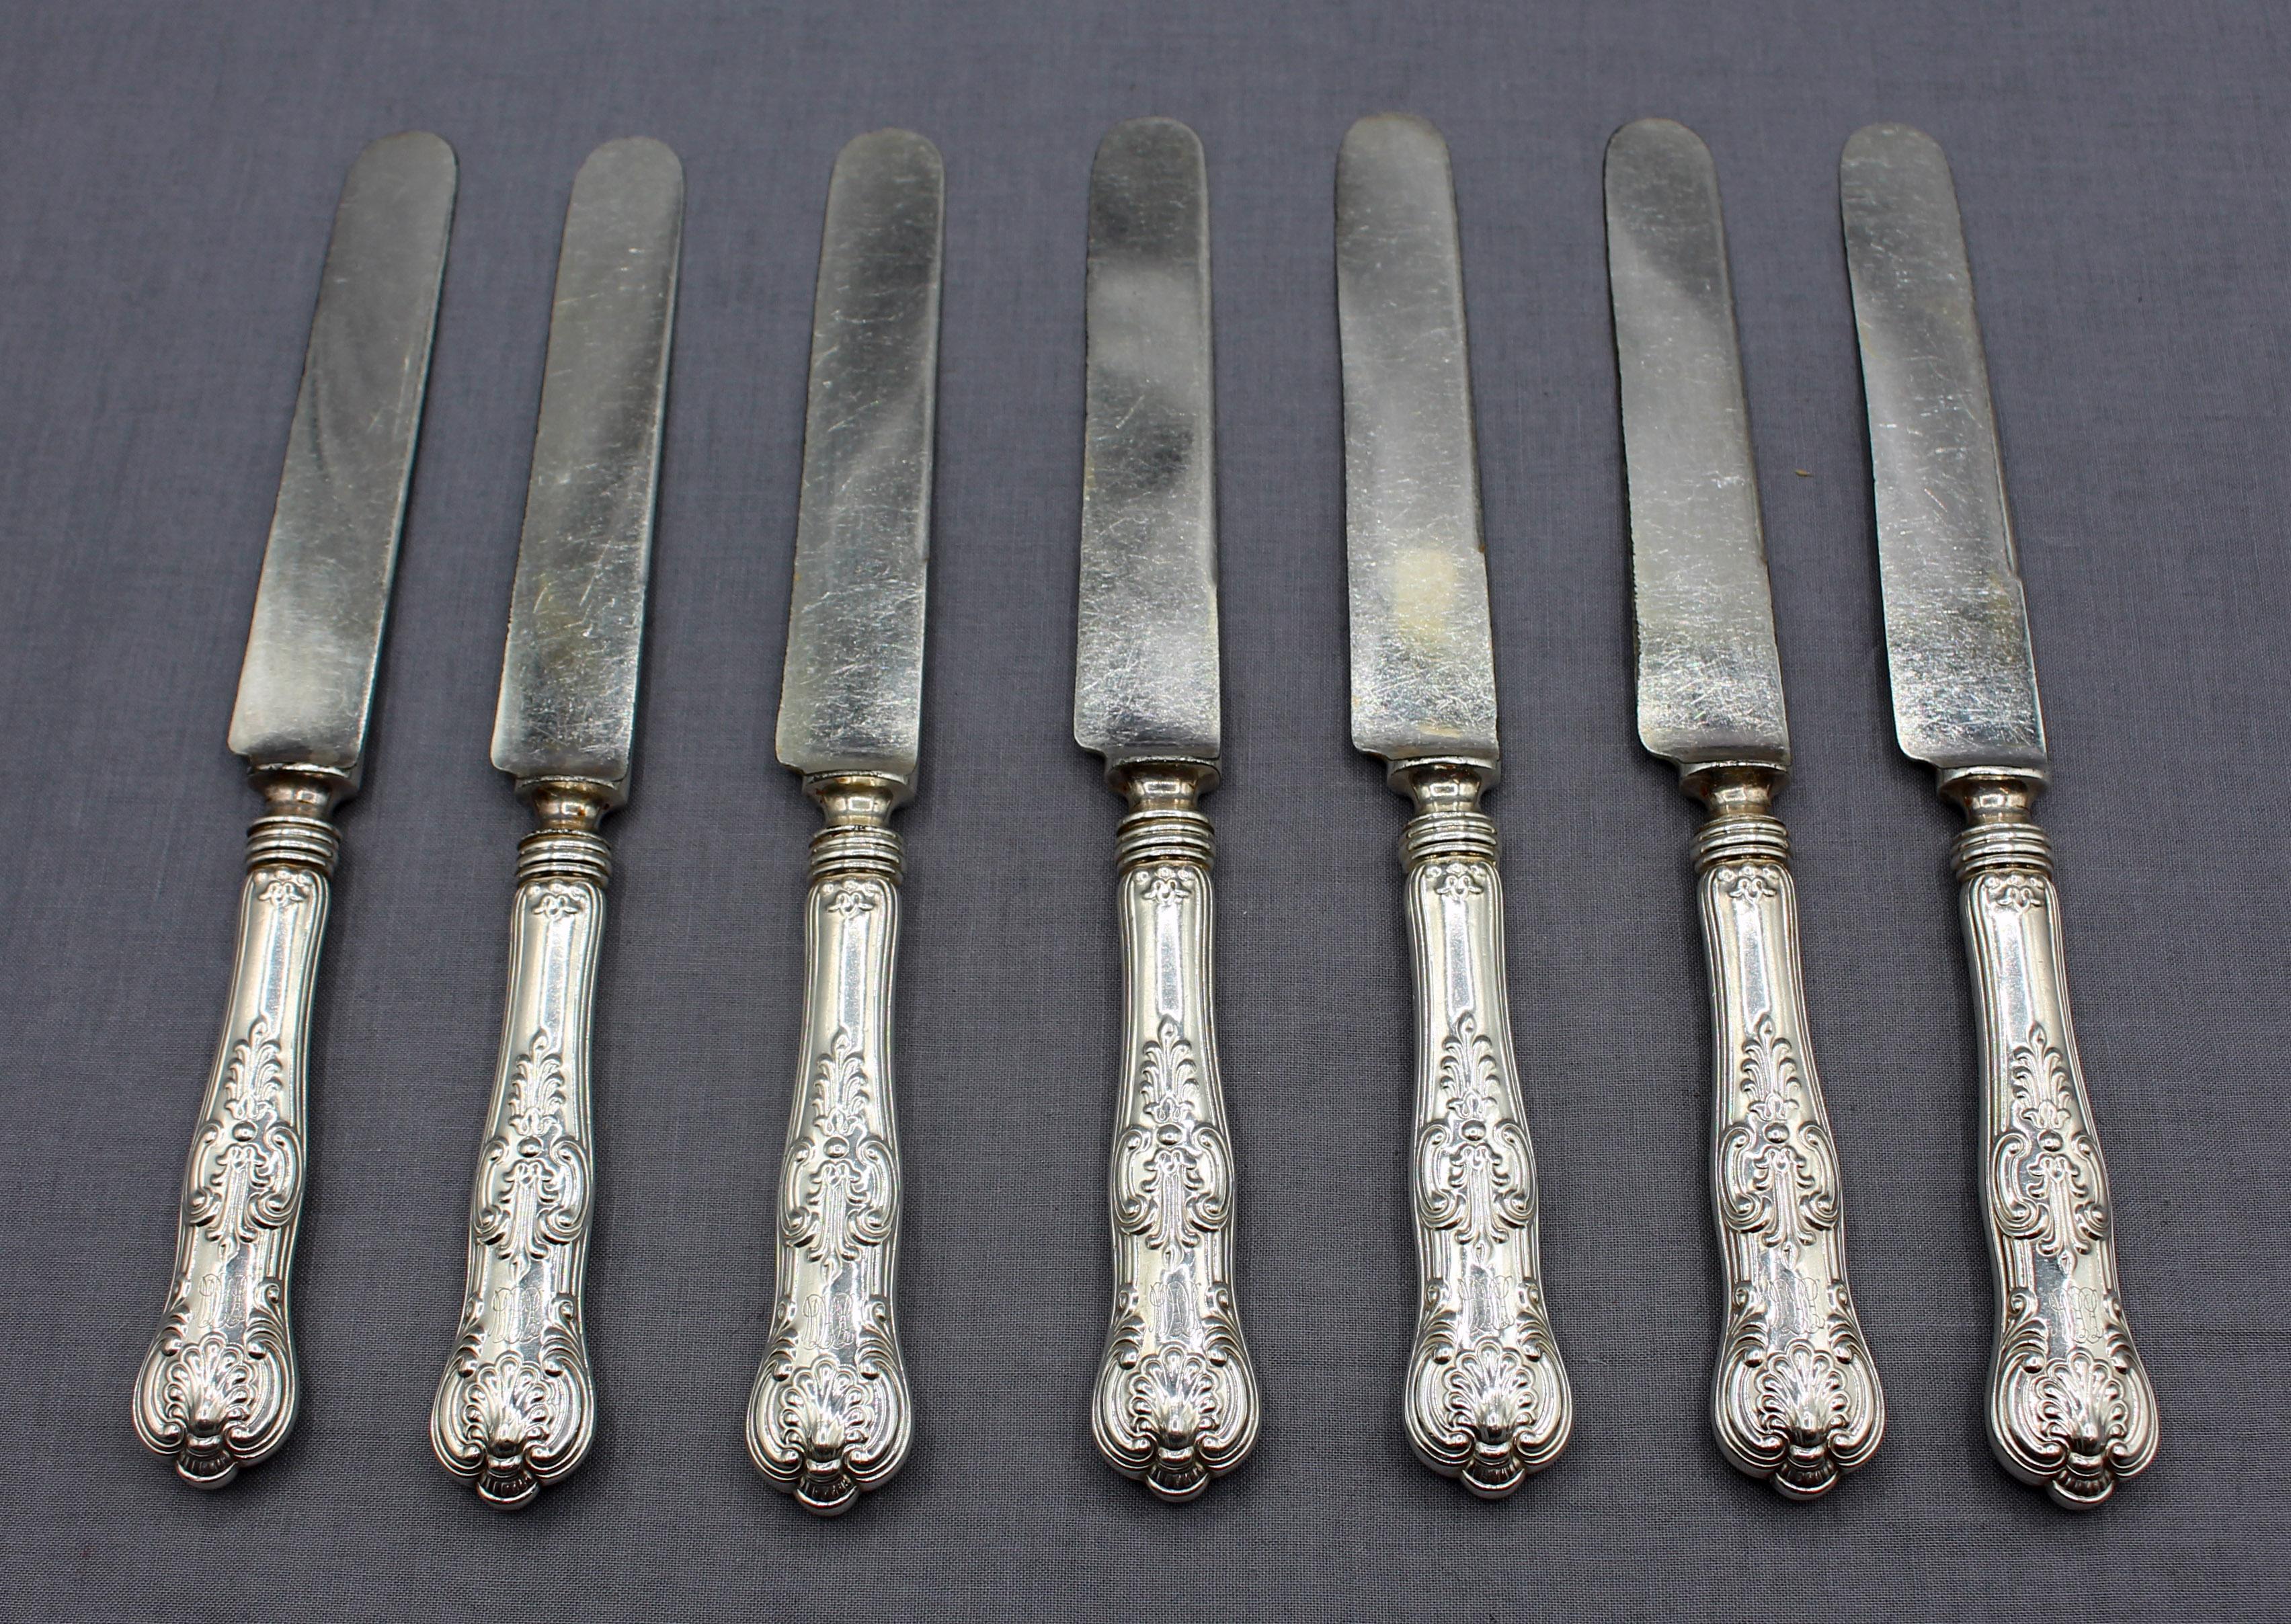 Set of 7 King pattern sterling silver hollow handle luncheon knives by Dominick & Haff, 1906. HHW monogram, engraved 1906 obverse.
8 3/8